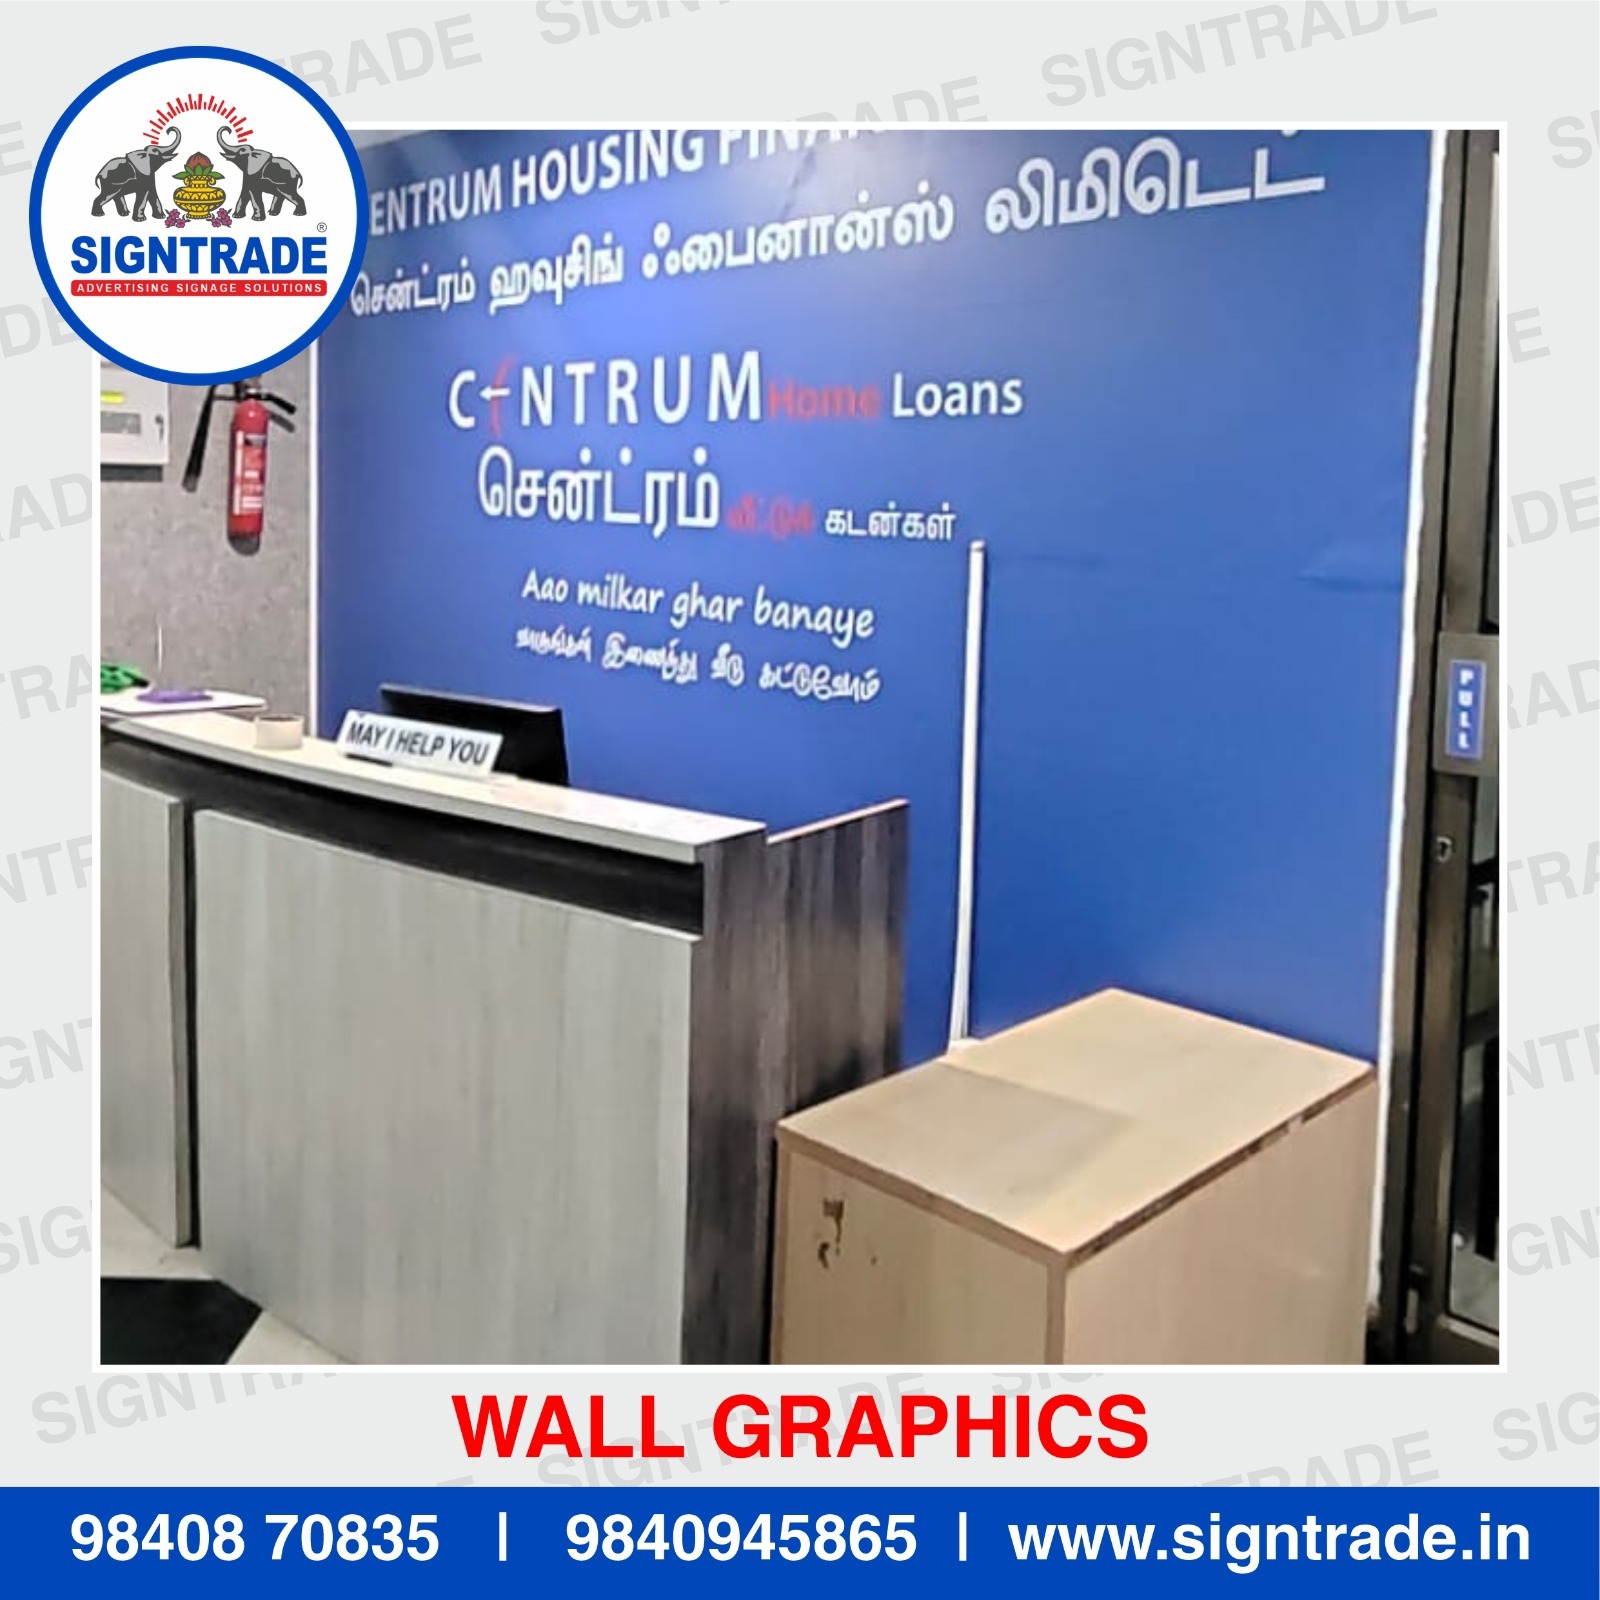 Wall Graphic Printing Services in Chennai